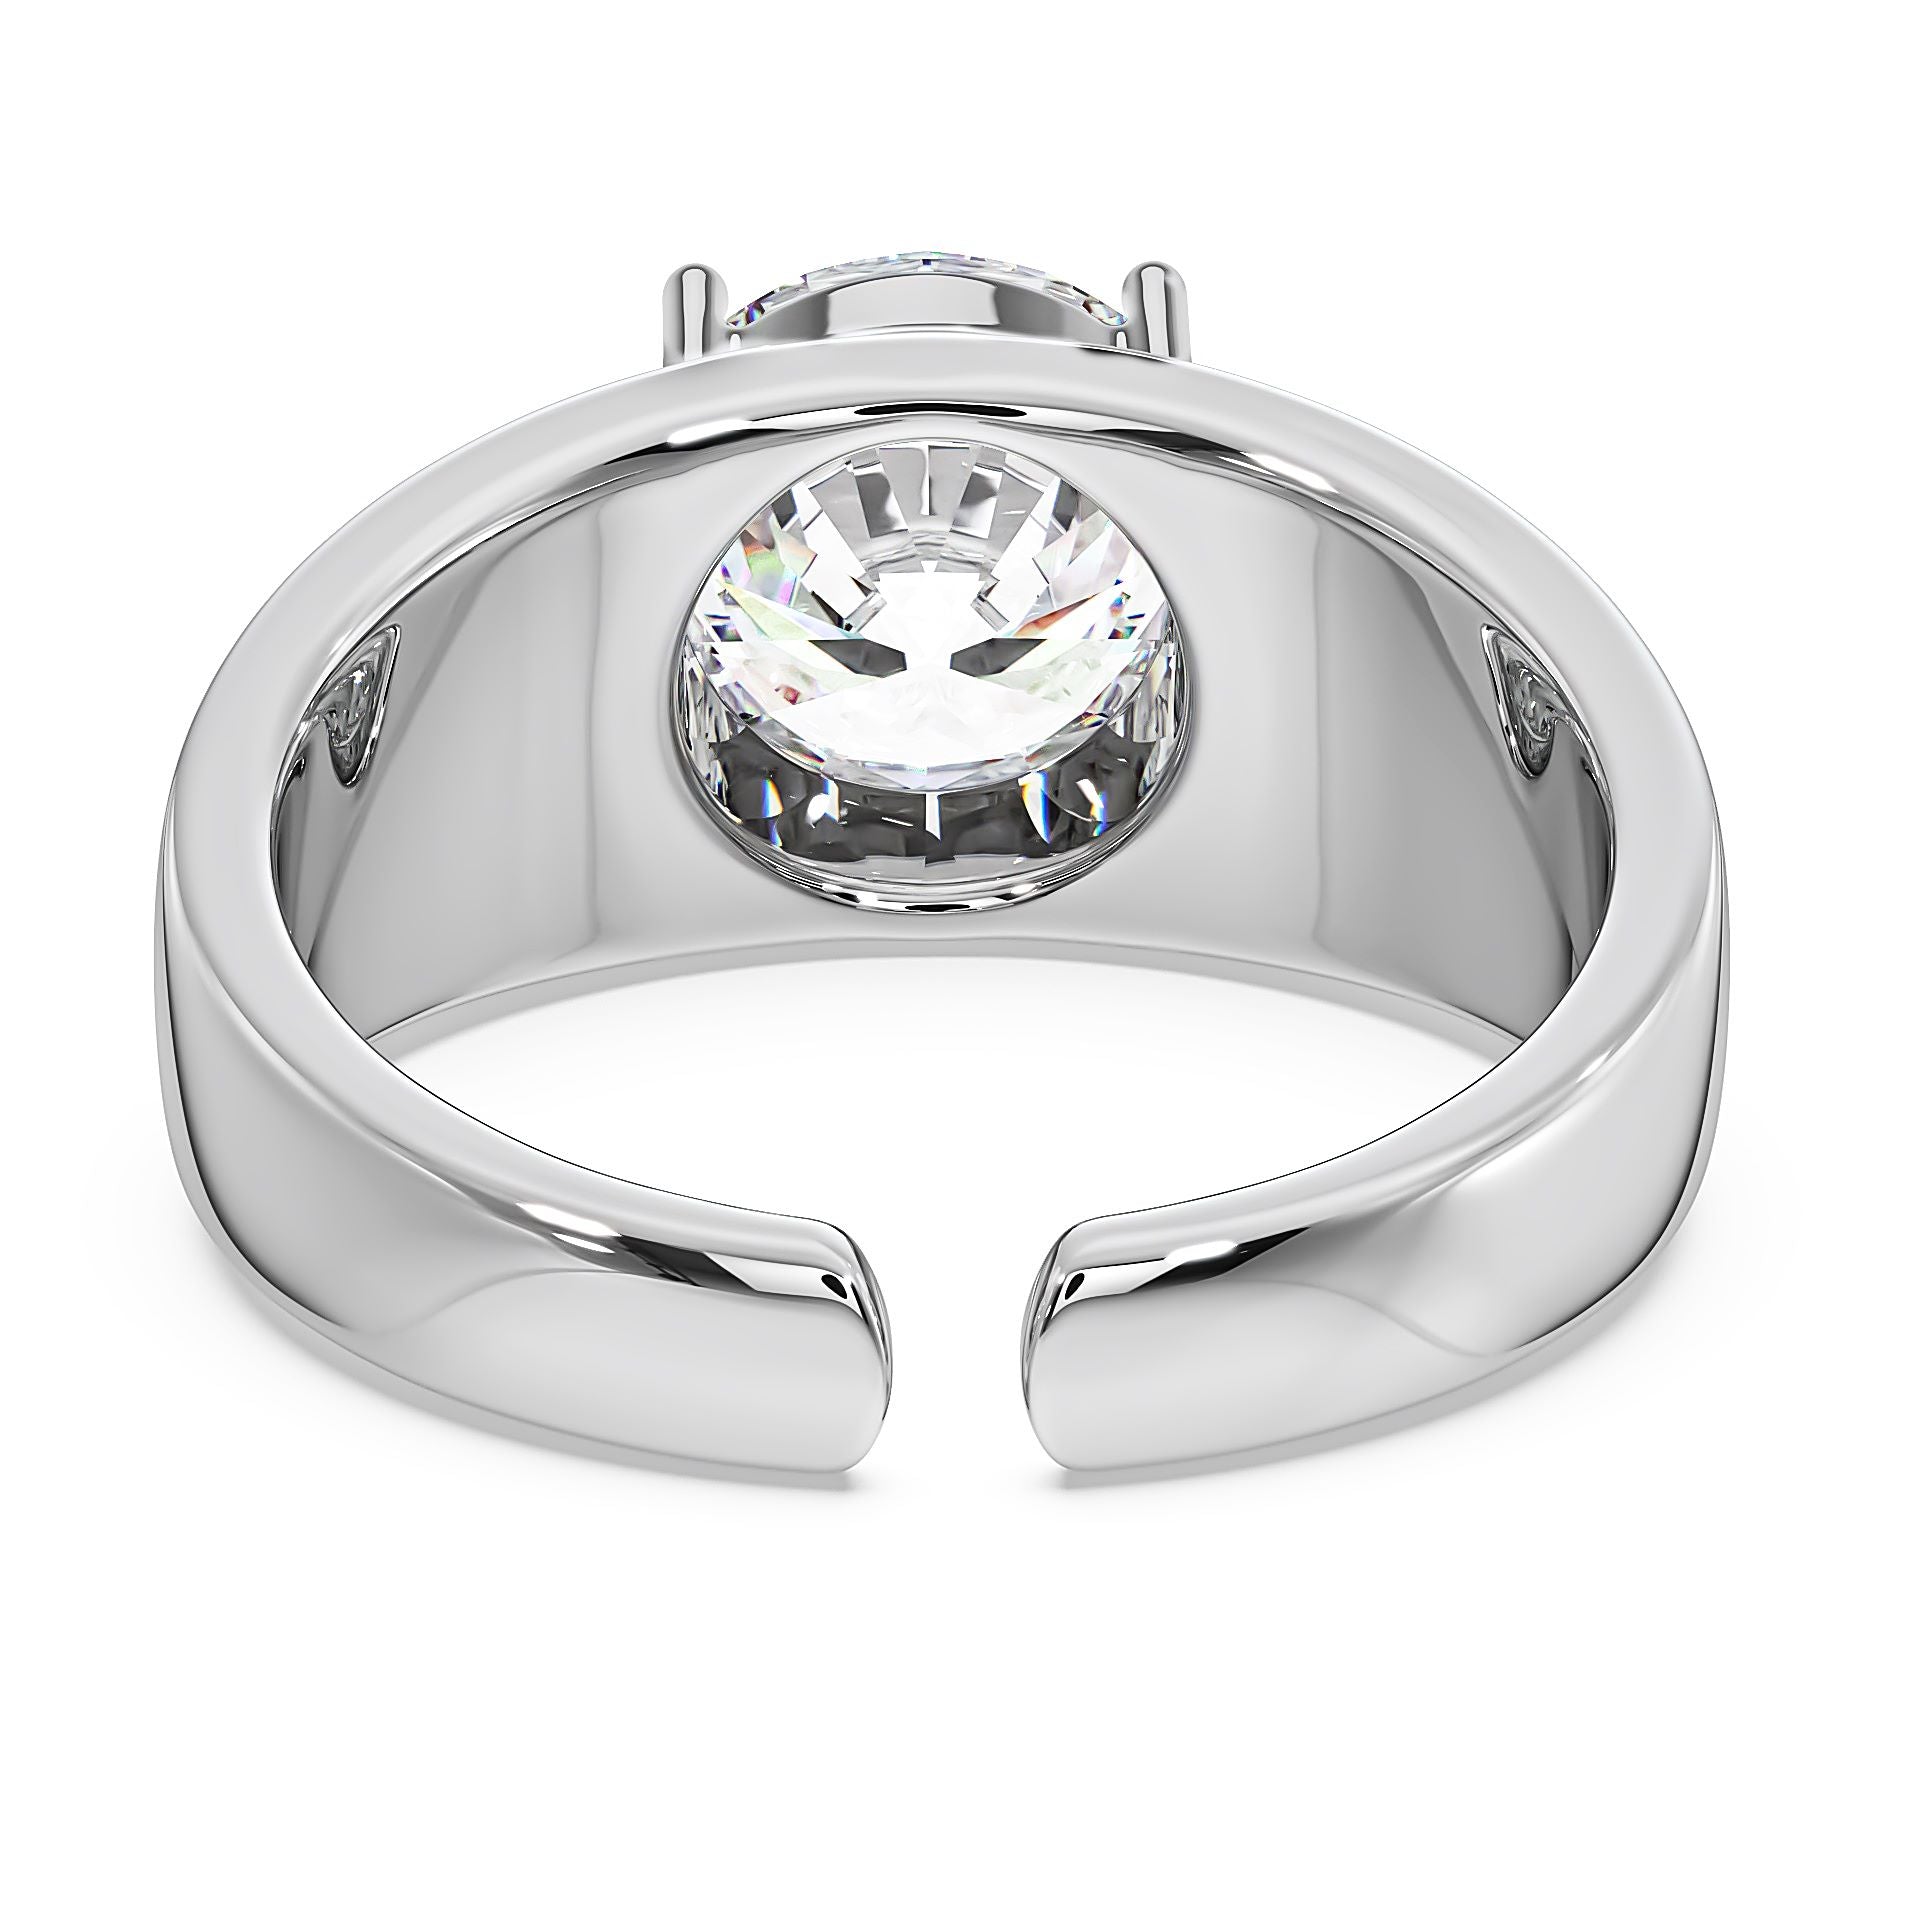 Myza 4-Carat Sterling Silver Men's Ring - Affordable Luxury Solitaire, Lab-Grown Diamond Alternative, Symbol of Love